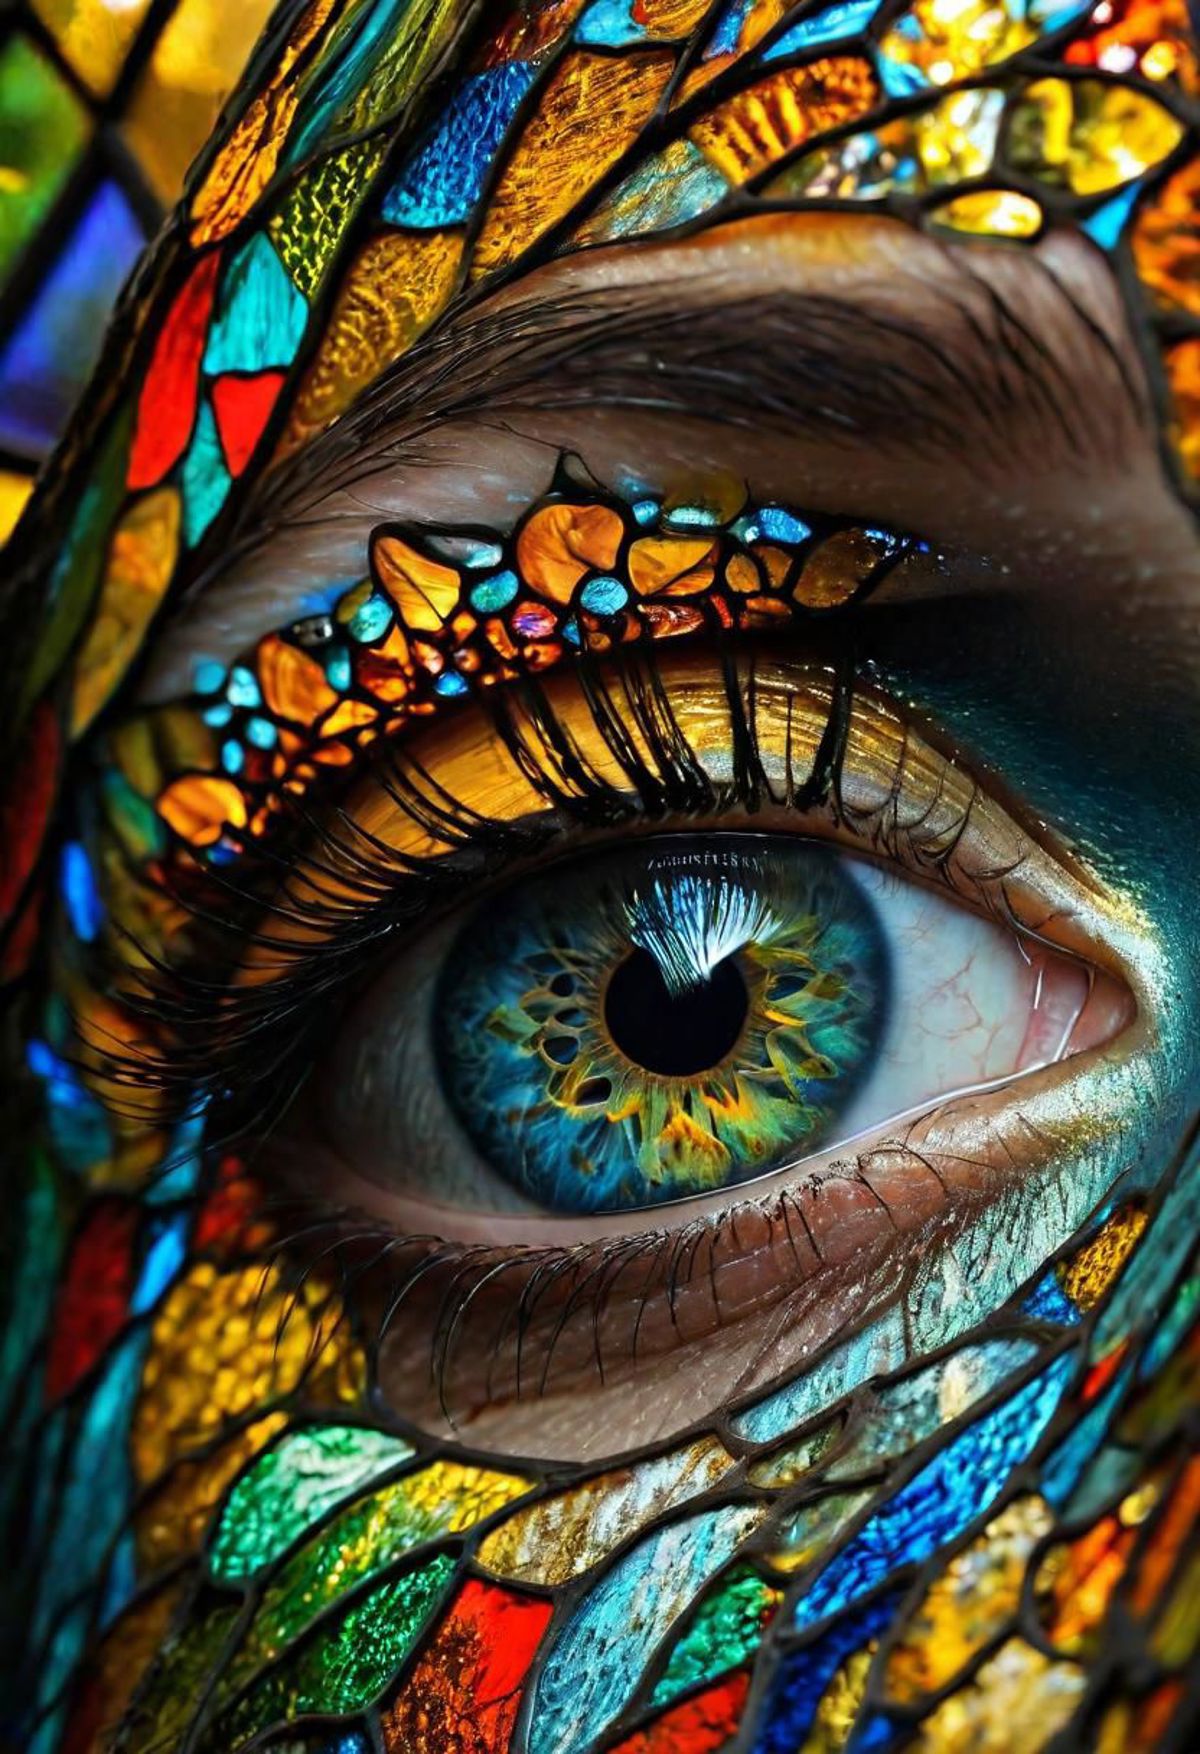 A close up of a person's eye with a colorful butterfly pattern on their face.